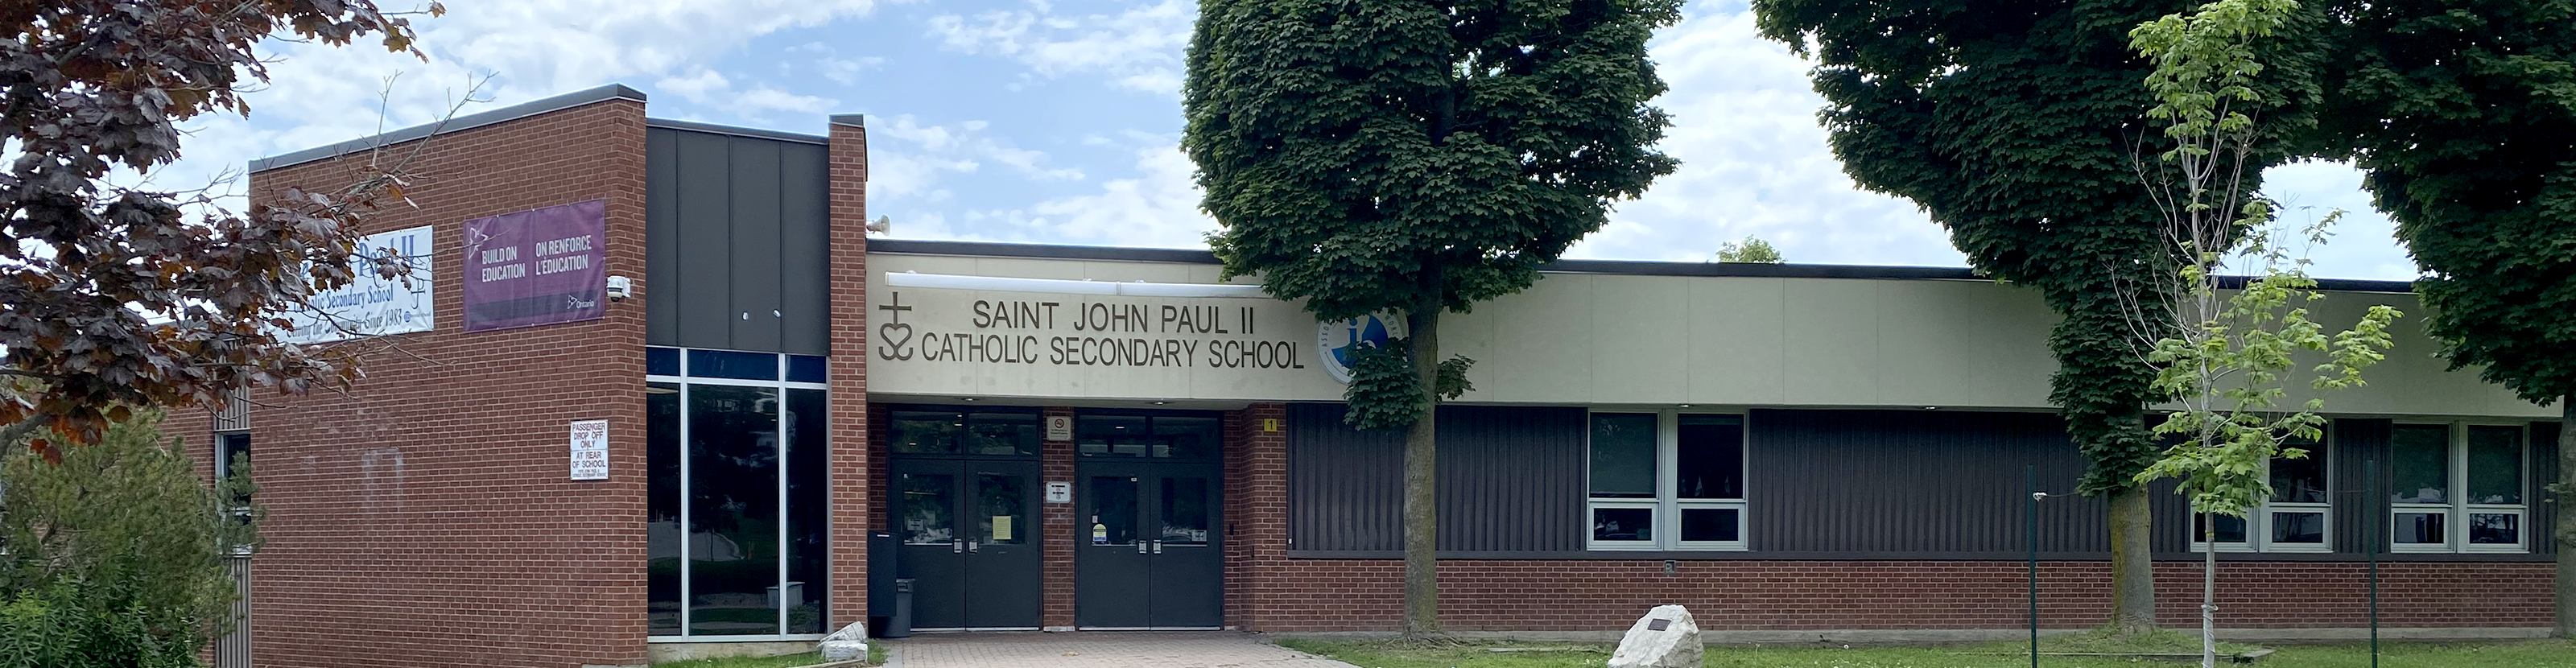 The front of the St. John Paul II Catholic Secondary School building